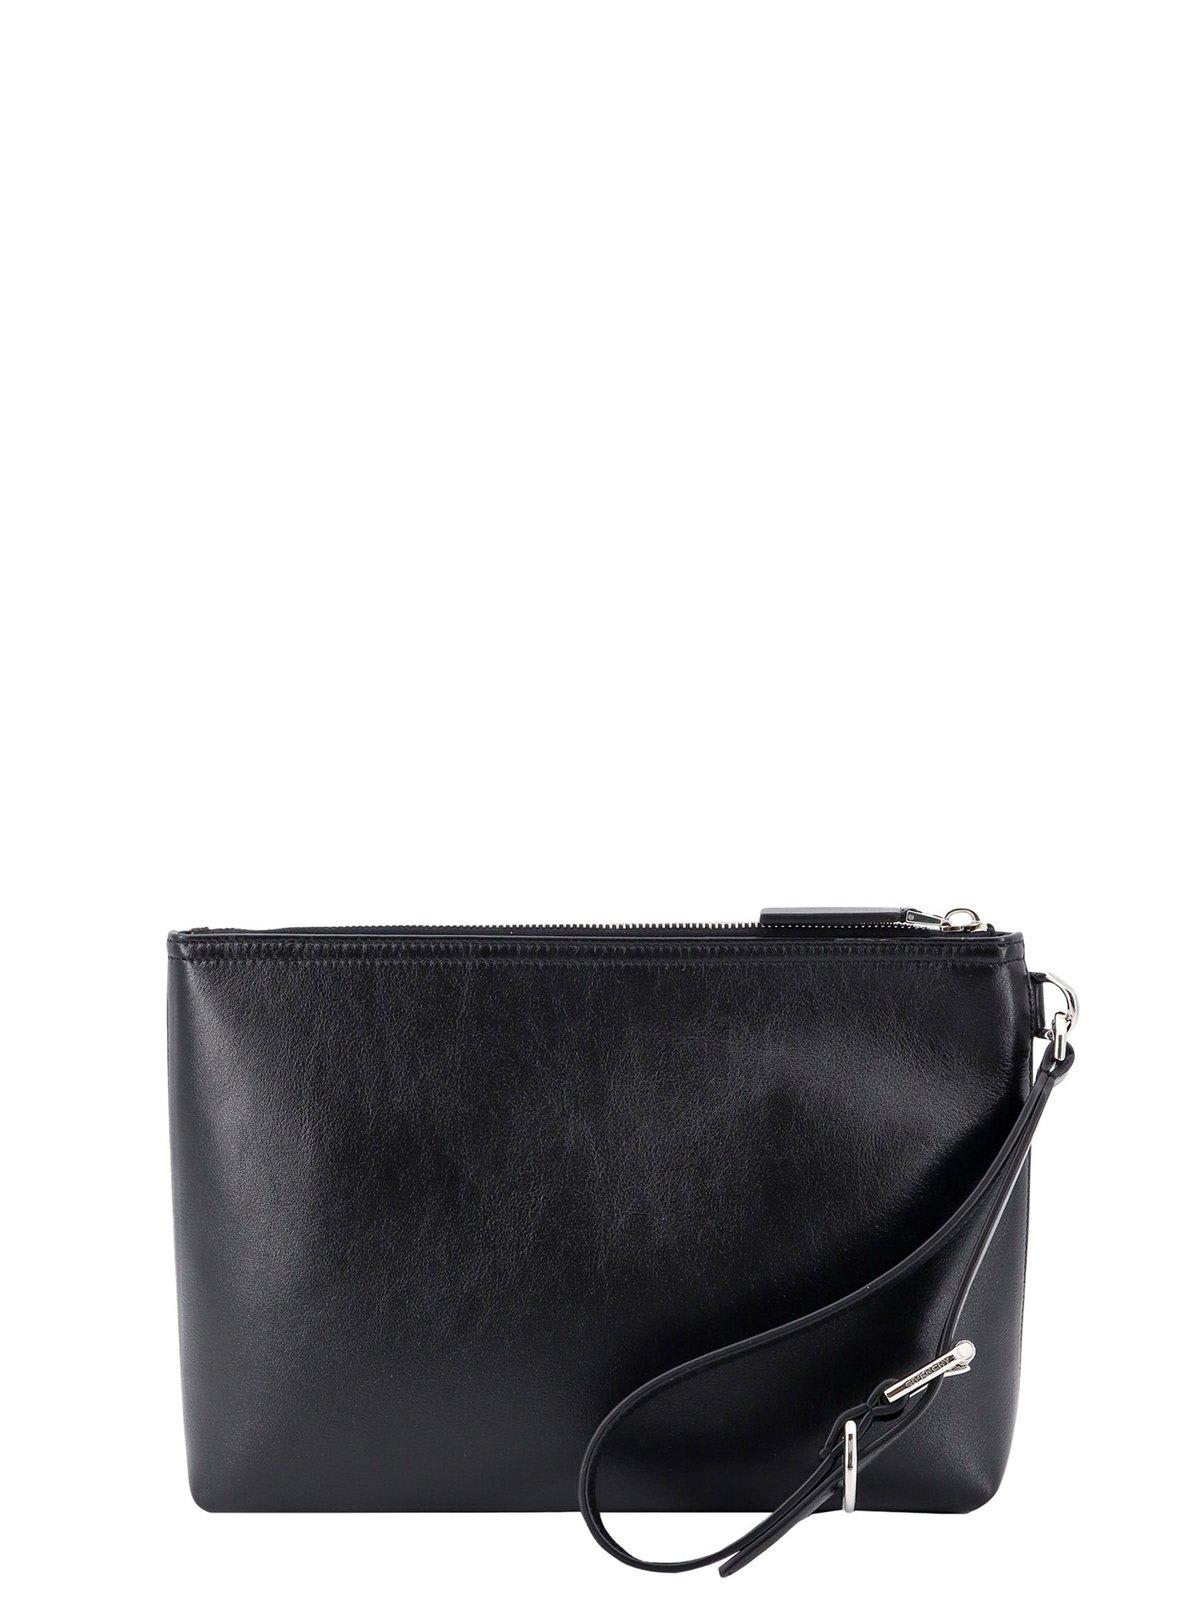 Shop Givenchy Voyou Zipped Pouch In Black